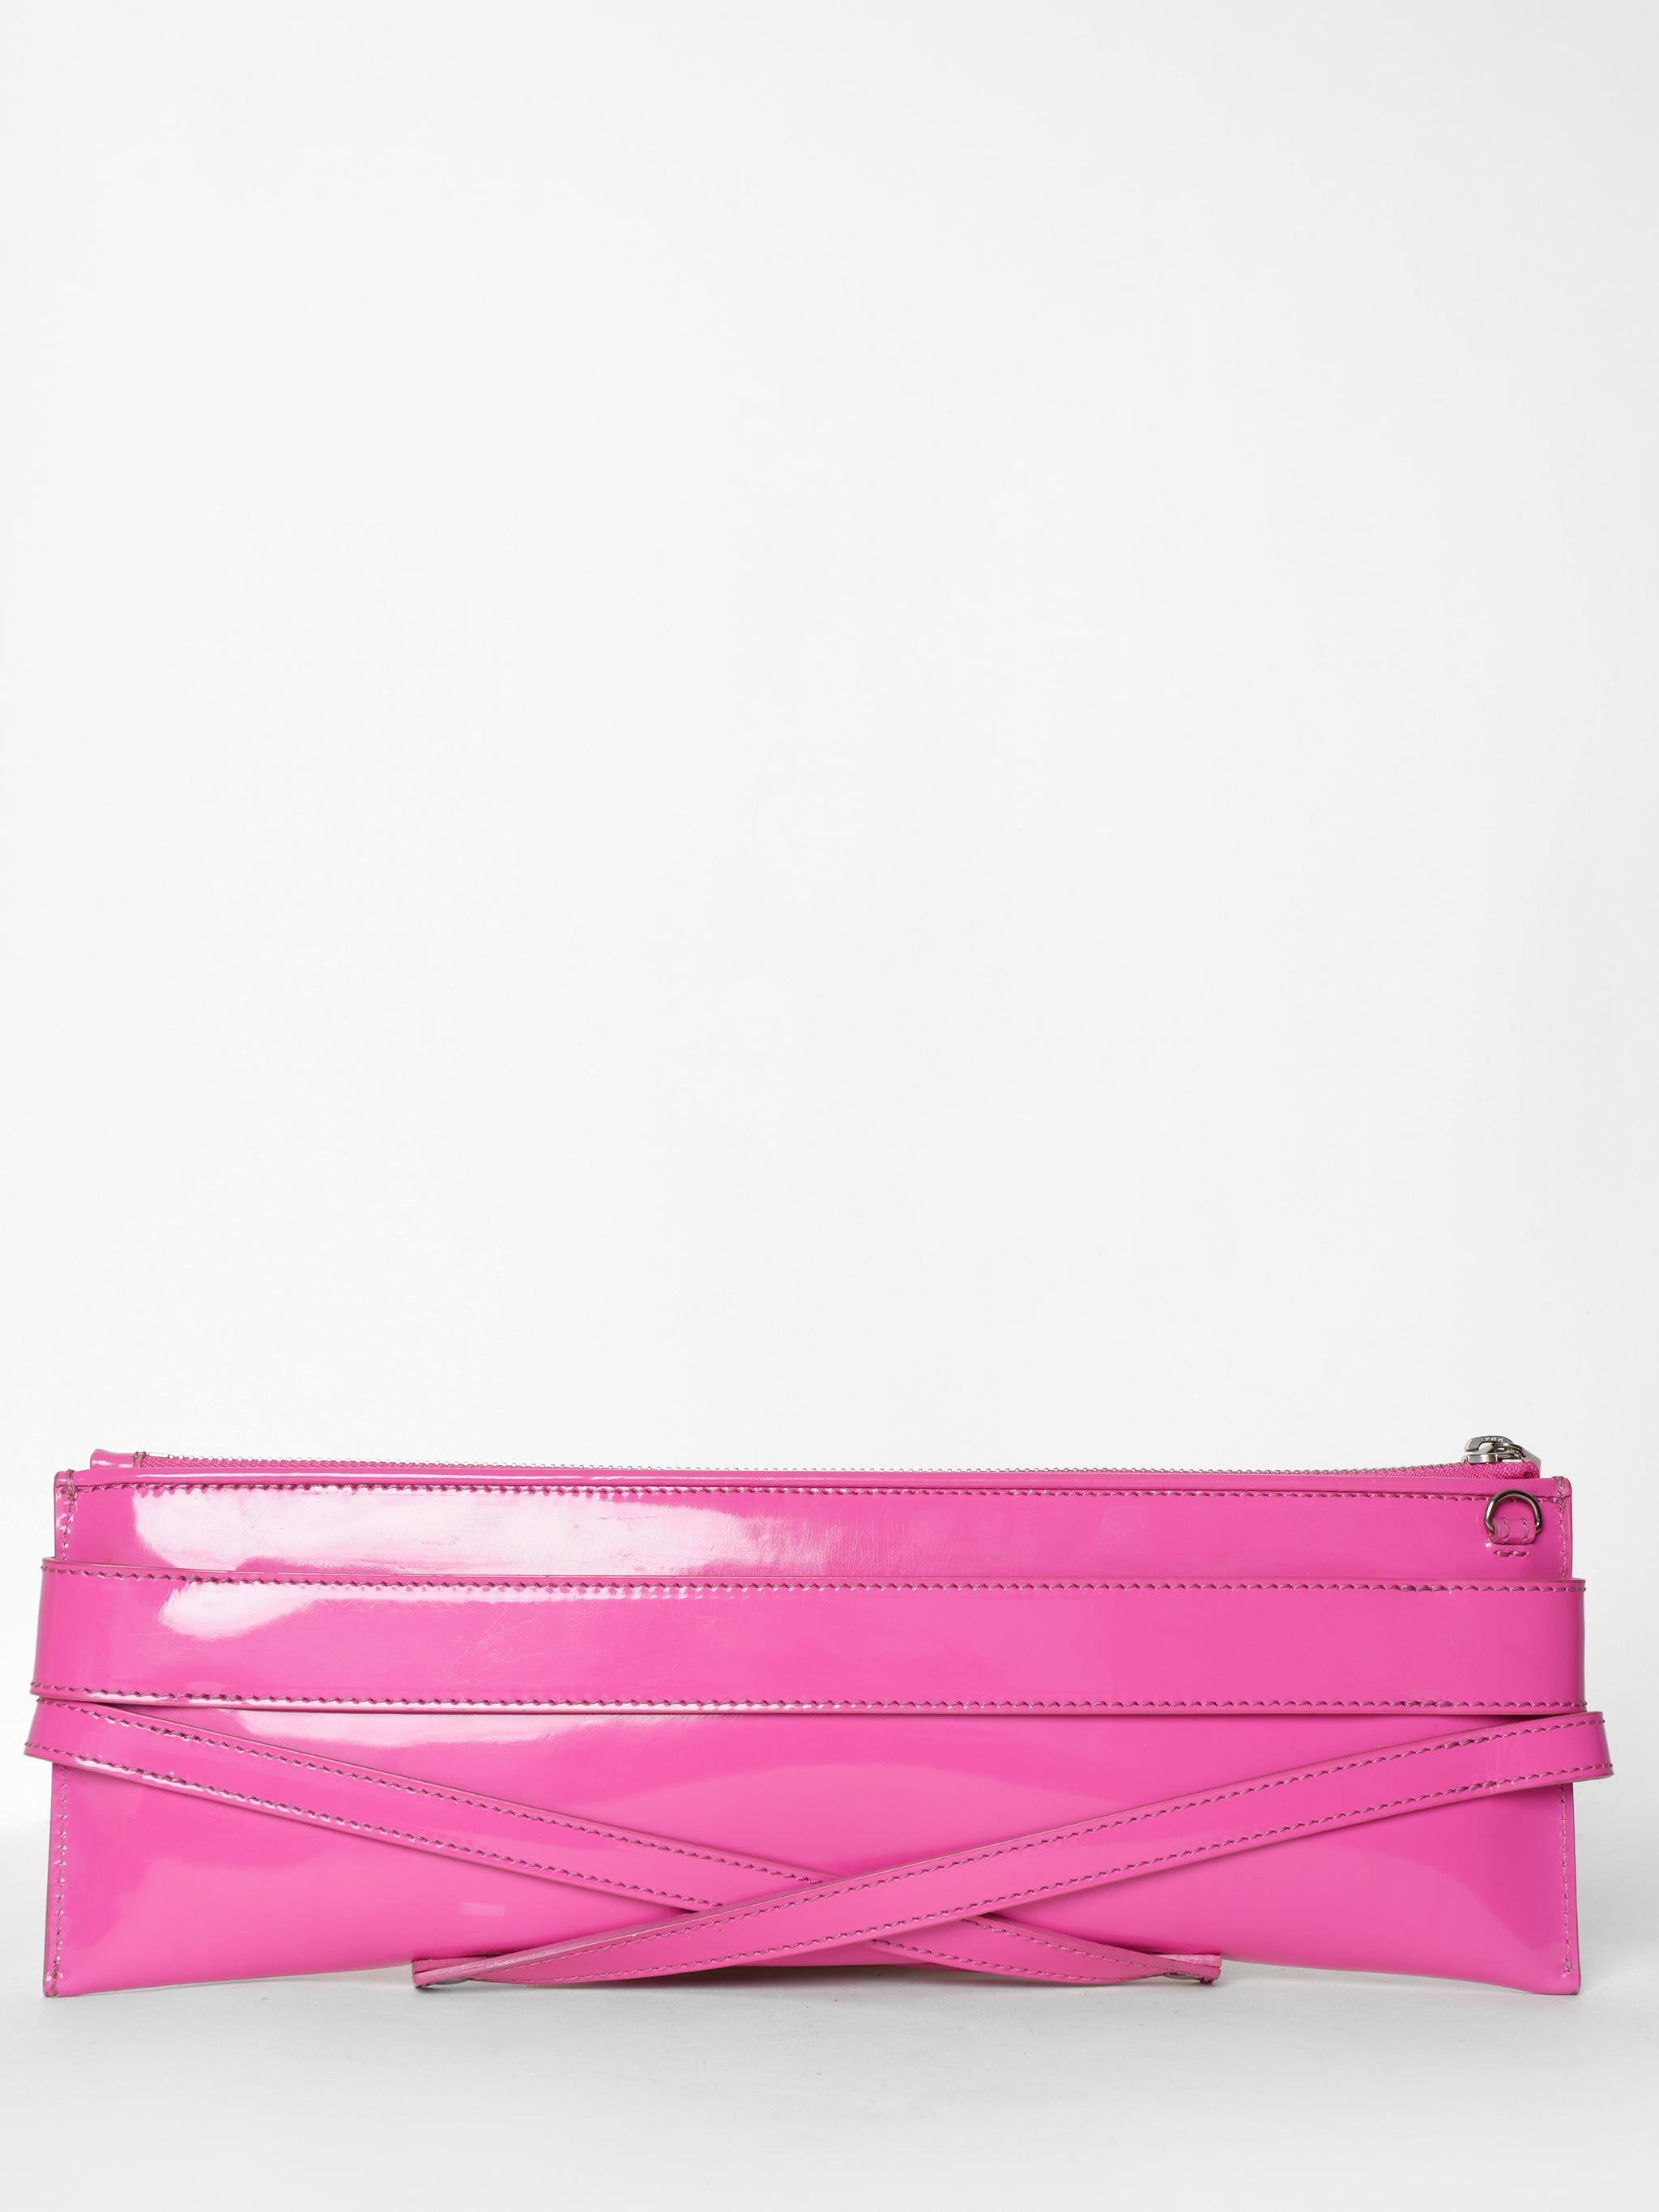 Burberry Pink Patent Leather Bridle Elongated Clutch Bag